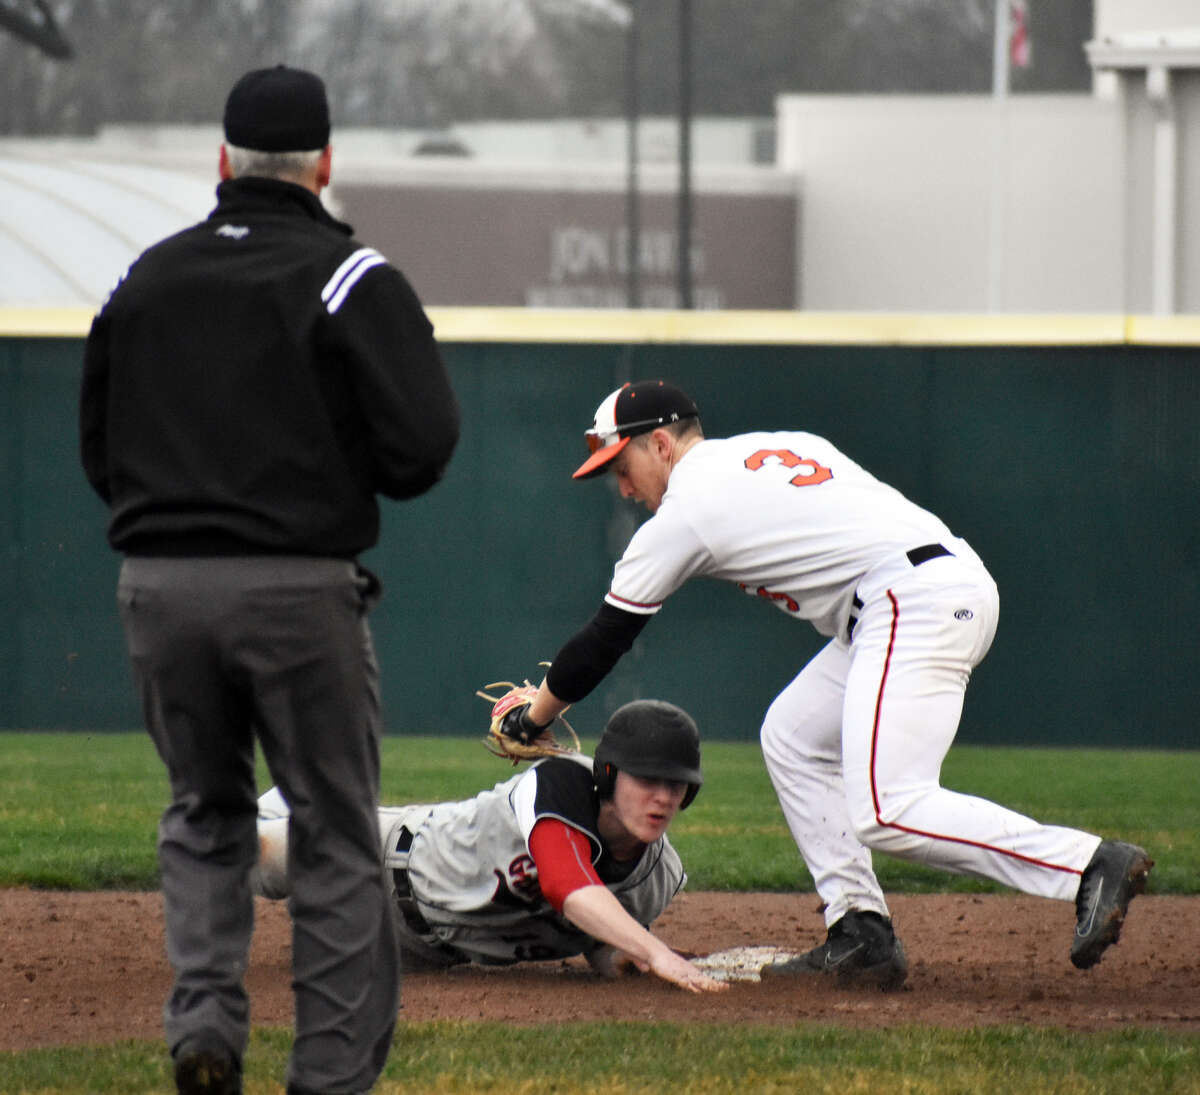 Edwardsville infielder Jack Cooper applies a tag to a Granite City baserunner during the second inning of Wednesday’s game.